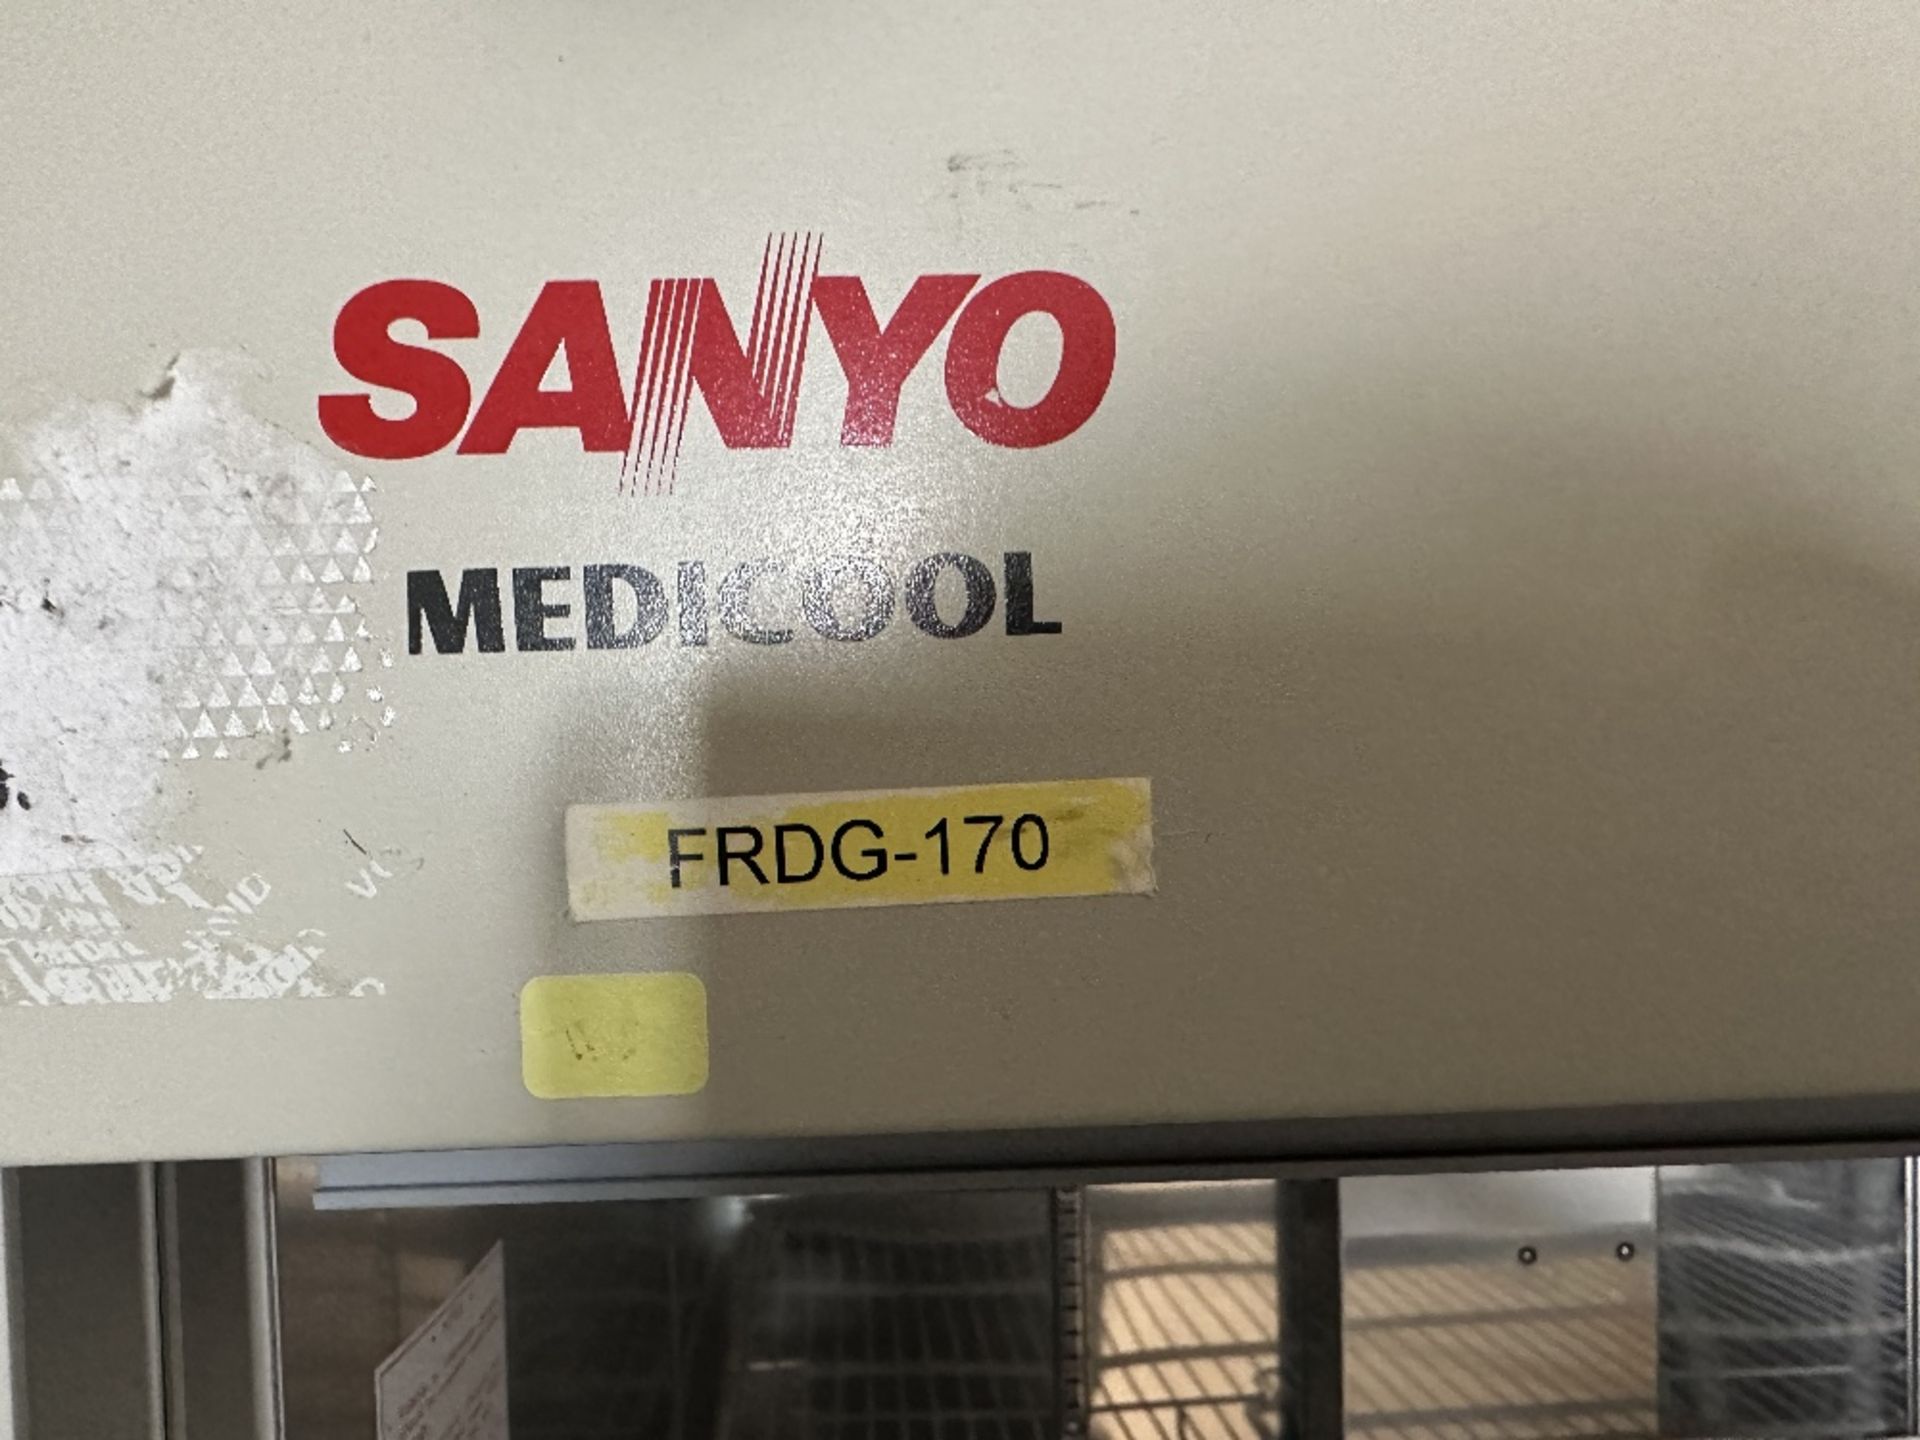 Sanyo MPR-1013 Pharmaceutical Refrigerator (LOCATED IN MIDDLETOWN, N.Y.)-FOR PACKAGING & SHIPPING - Image 4 of 6